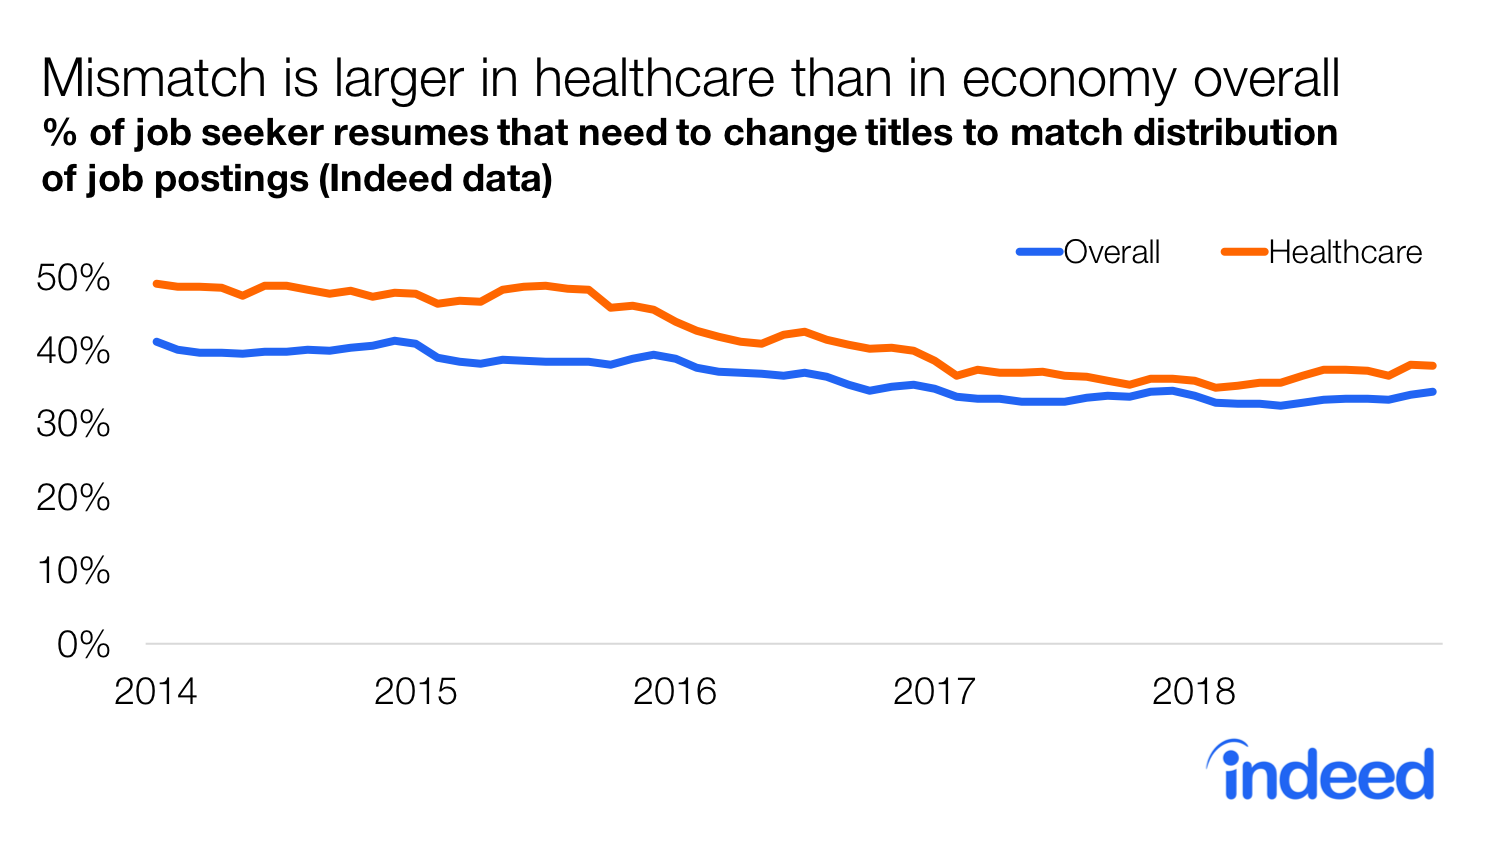 Mismatch is larger in healthcare than in economy overall